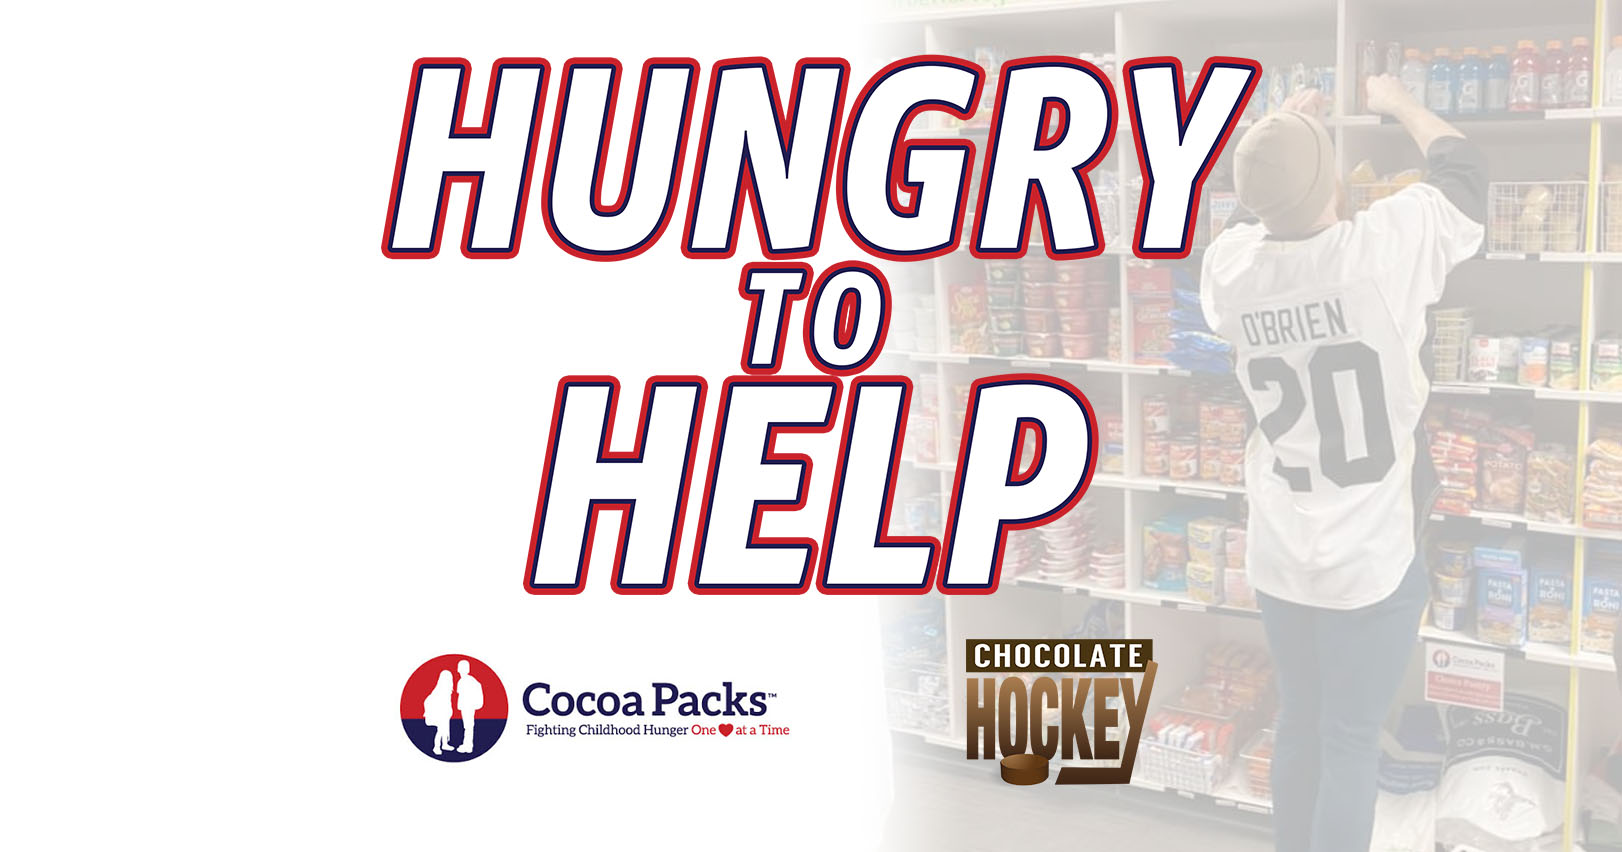 Chocolate Hockey To Host “Hungry To Help” Telethon On June 4